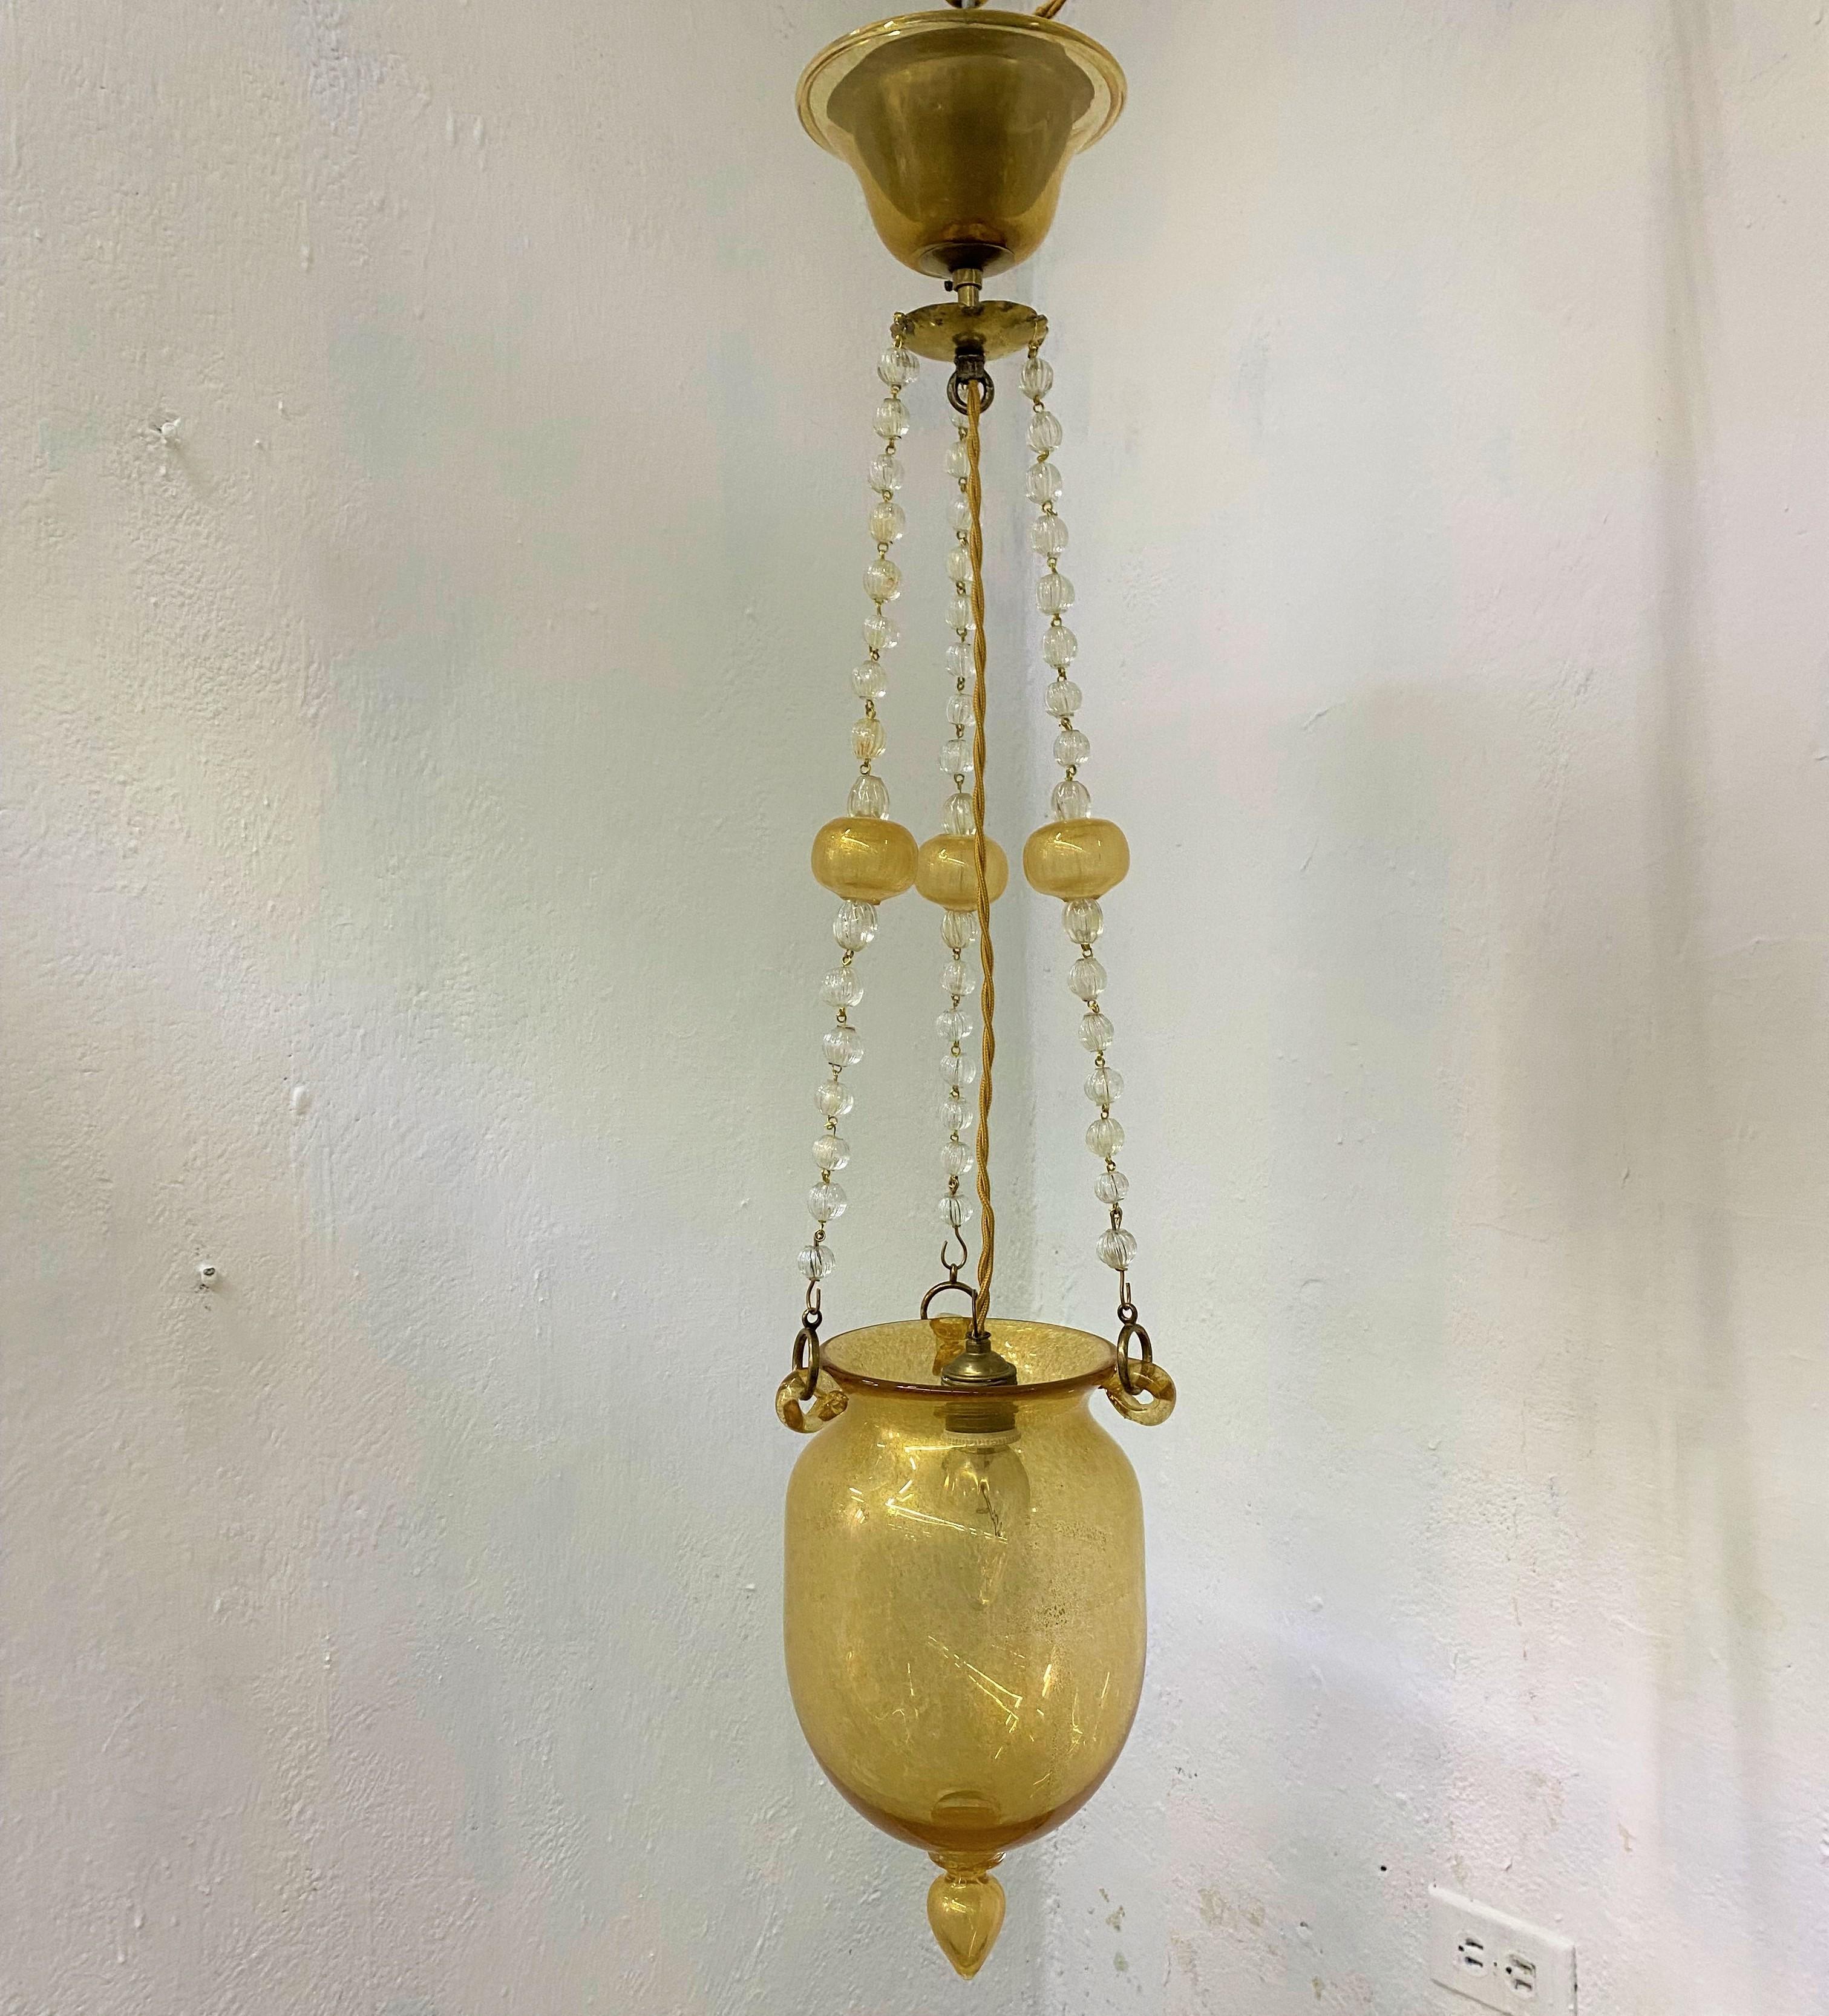 Beautiful Art Deco pendant lantern attributed to Barovier e Toso in hand blown clear and gold leaf Murano glass and brass (can be polished if desired) circa 1930.
Total height is 90cm, width is 19cm.
No breaks or repairs, recently rewired for 110v.